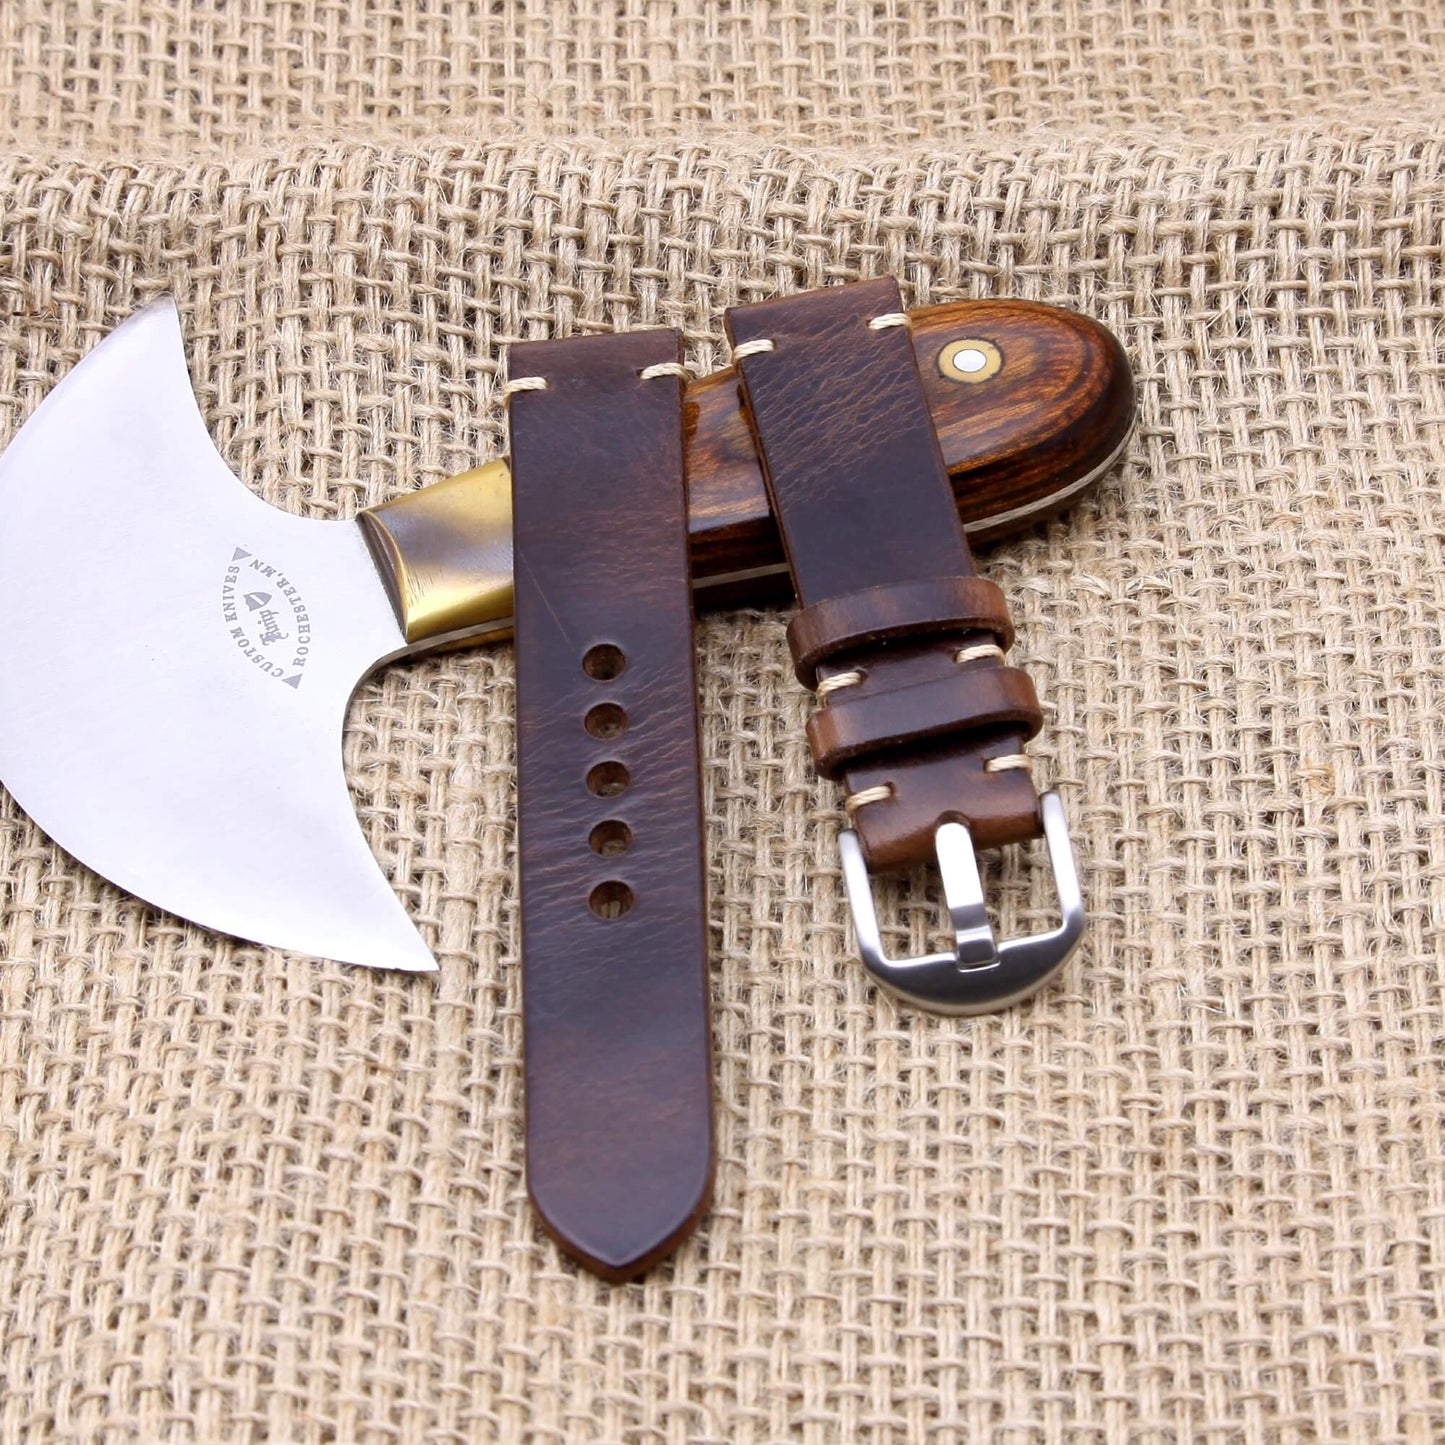 Upgrade your Apple Watch with a touch of camo: Military 103 Italian leather strap, hand-stitched for a perfect fit.